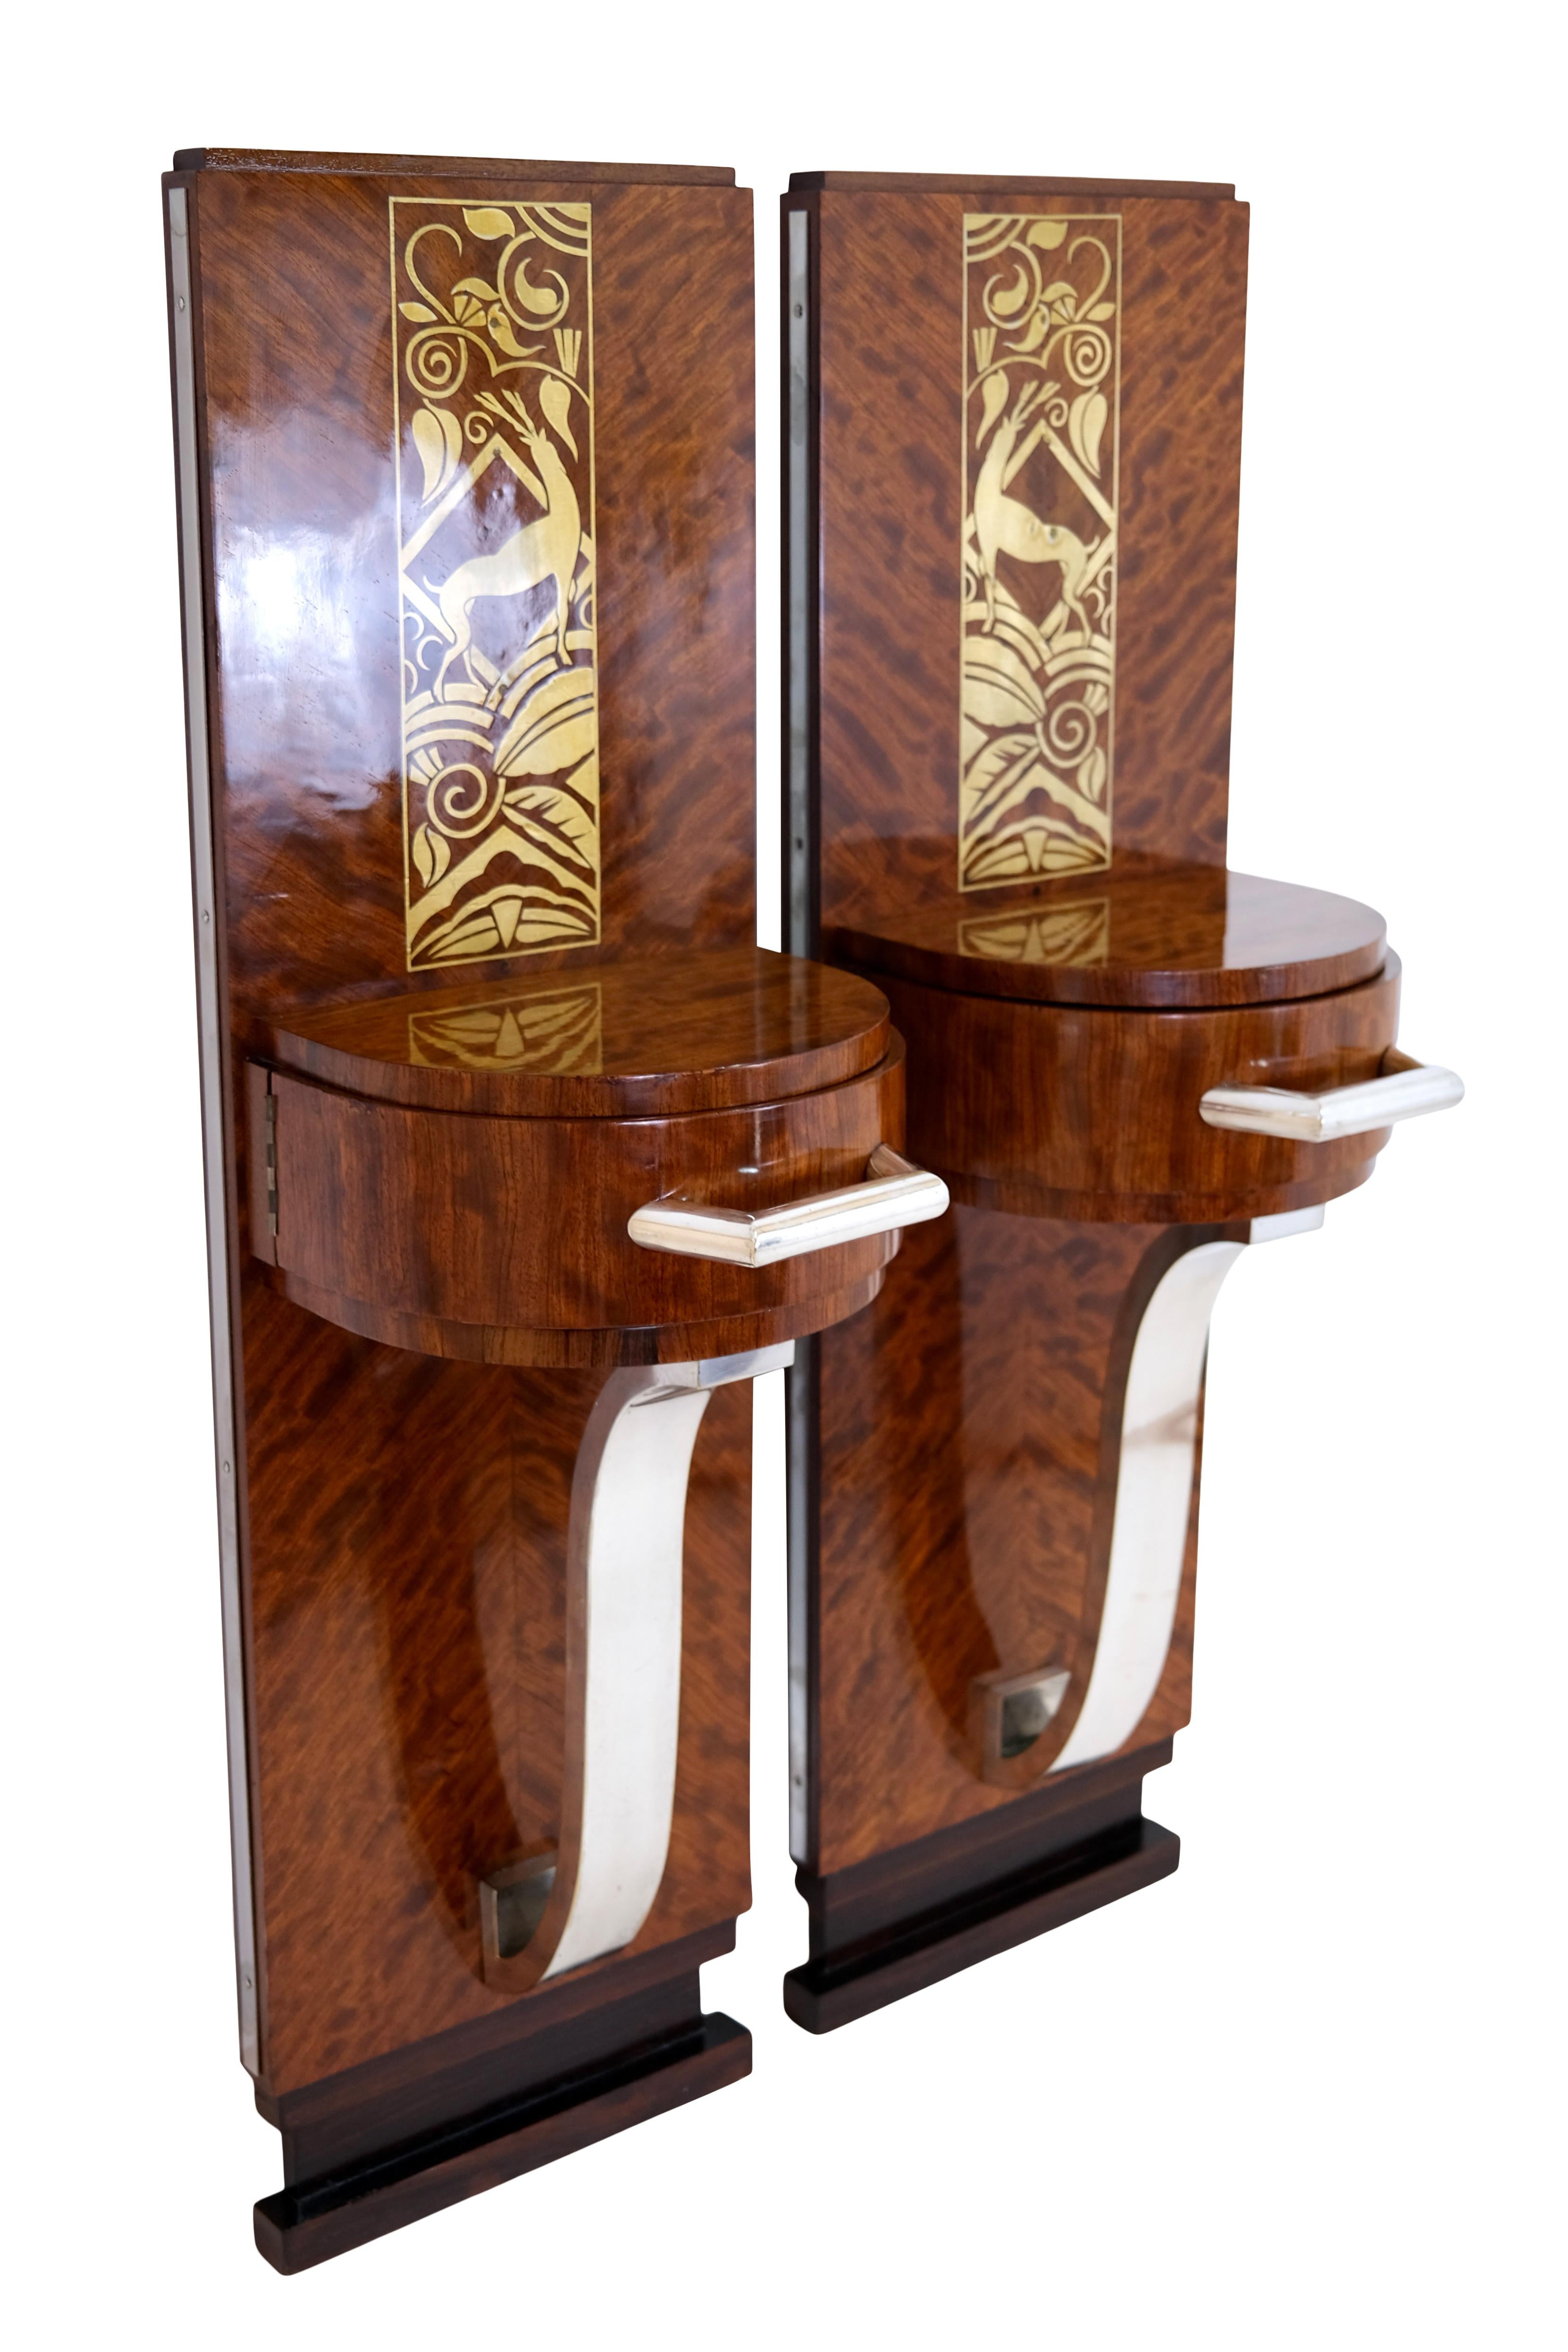 Polished Set of 2 1930s French Art Deco Half Round Bedside Table Consoles with Inlays